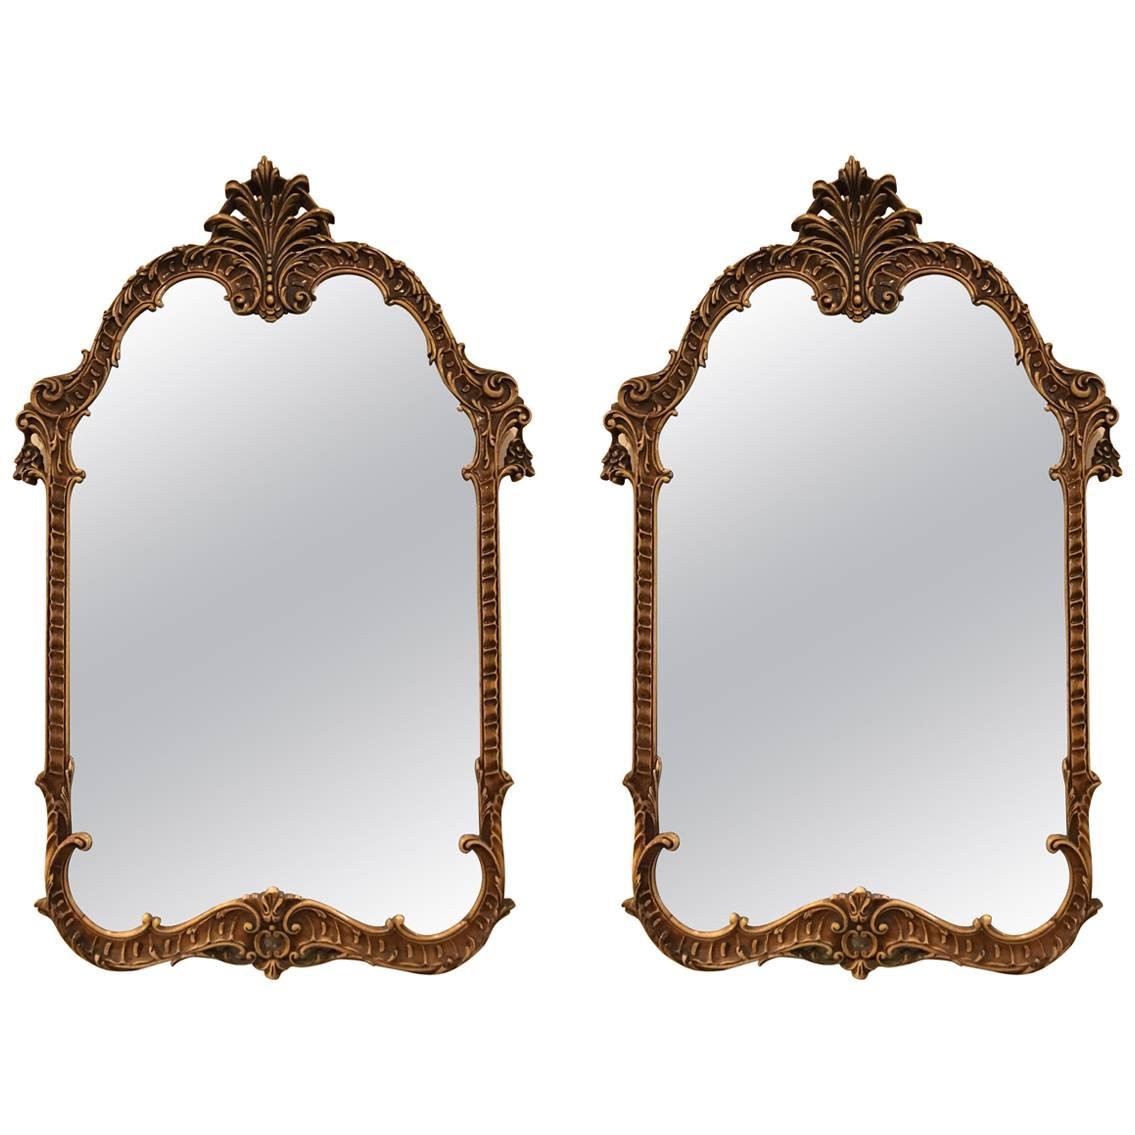 Pair of Italian Gilt and Distressed Decorated Italian Wooden Mirrors